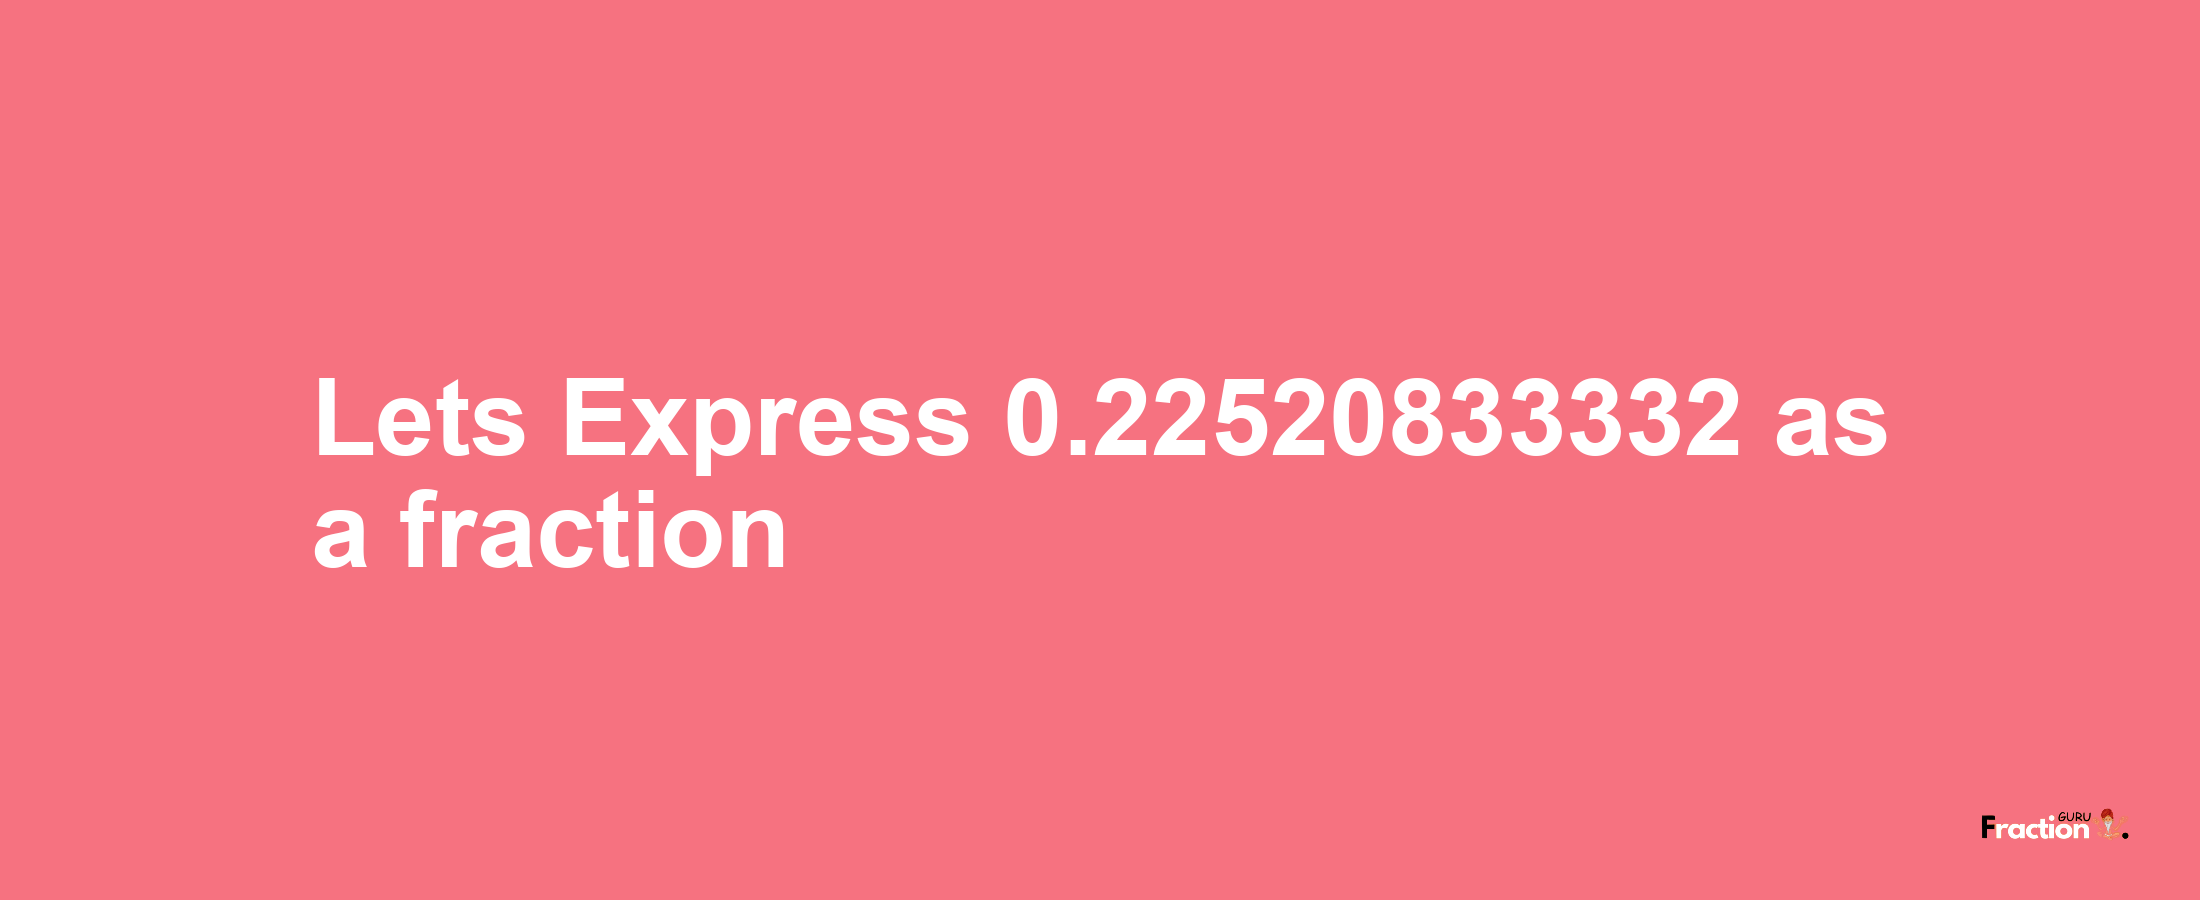 Lets Express 0.22520833332 as afraction